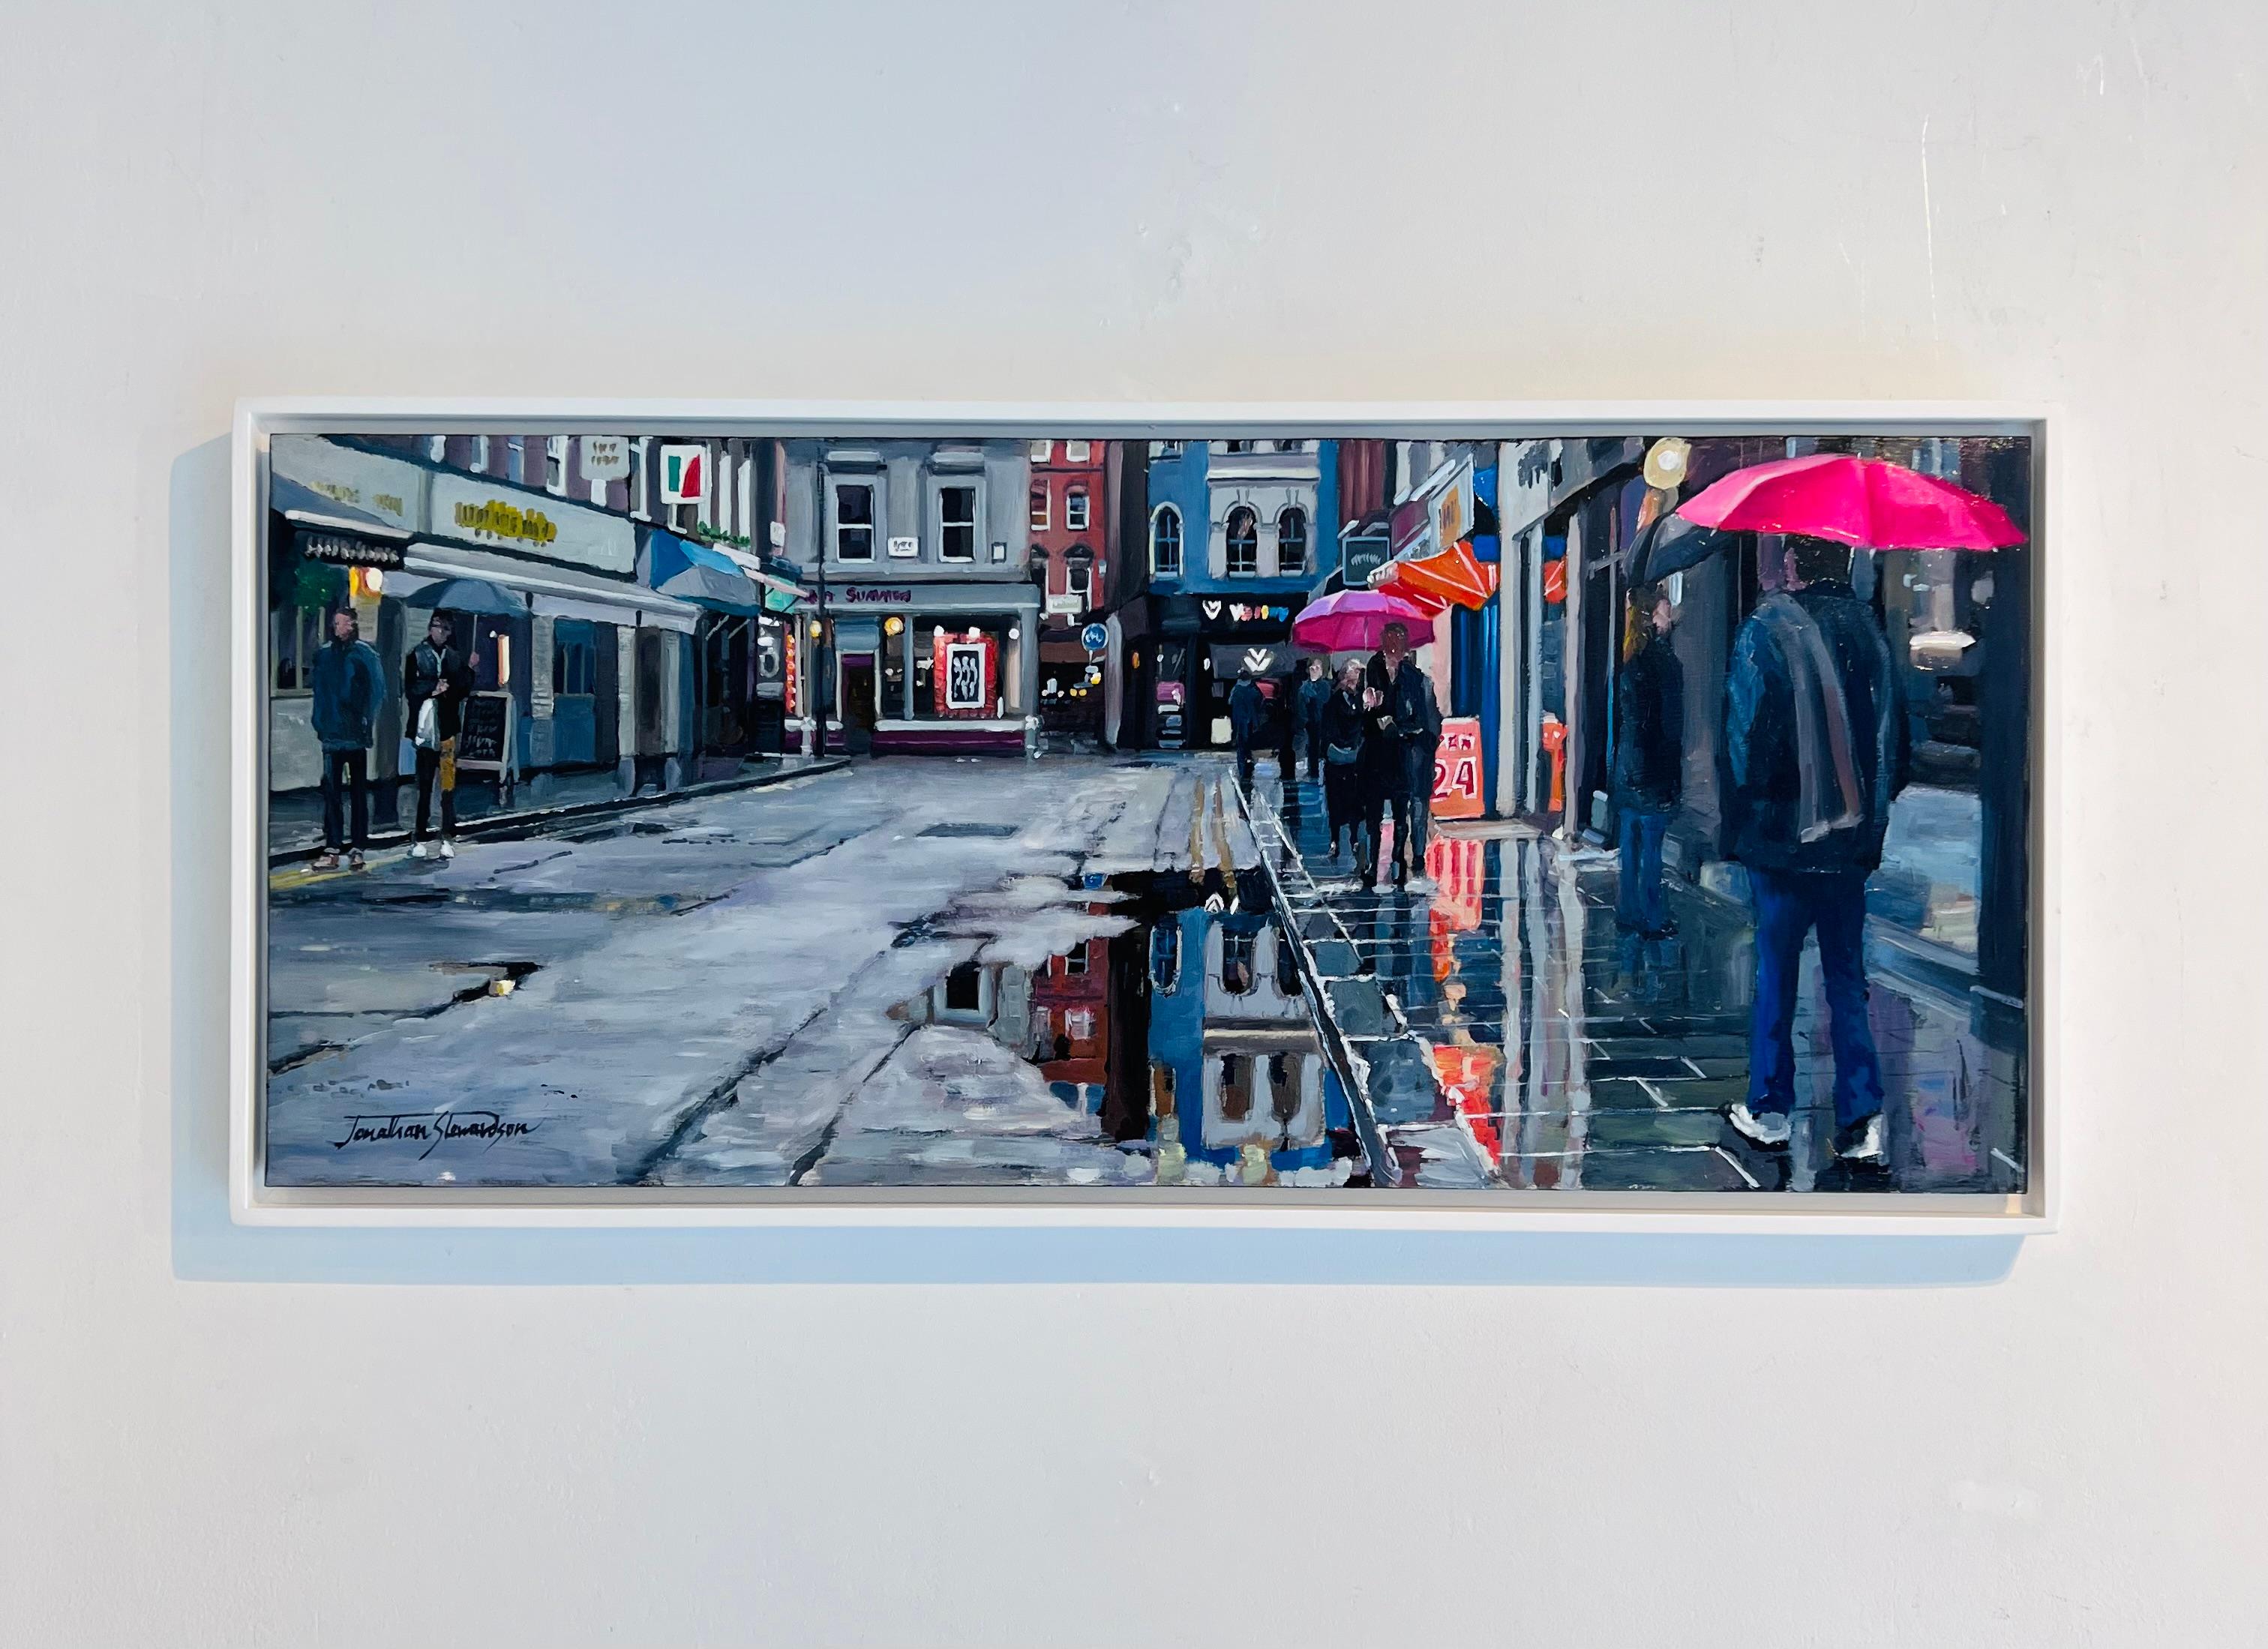 Old Compton St (Day)-Original London cityscape painting-modern impressionist art - Impressionist Art by Jonathan Stewerdson